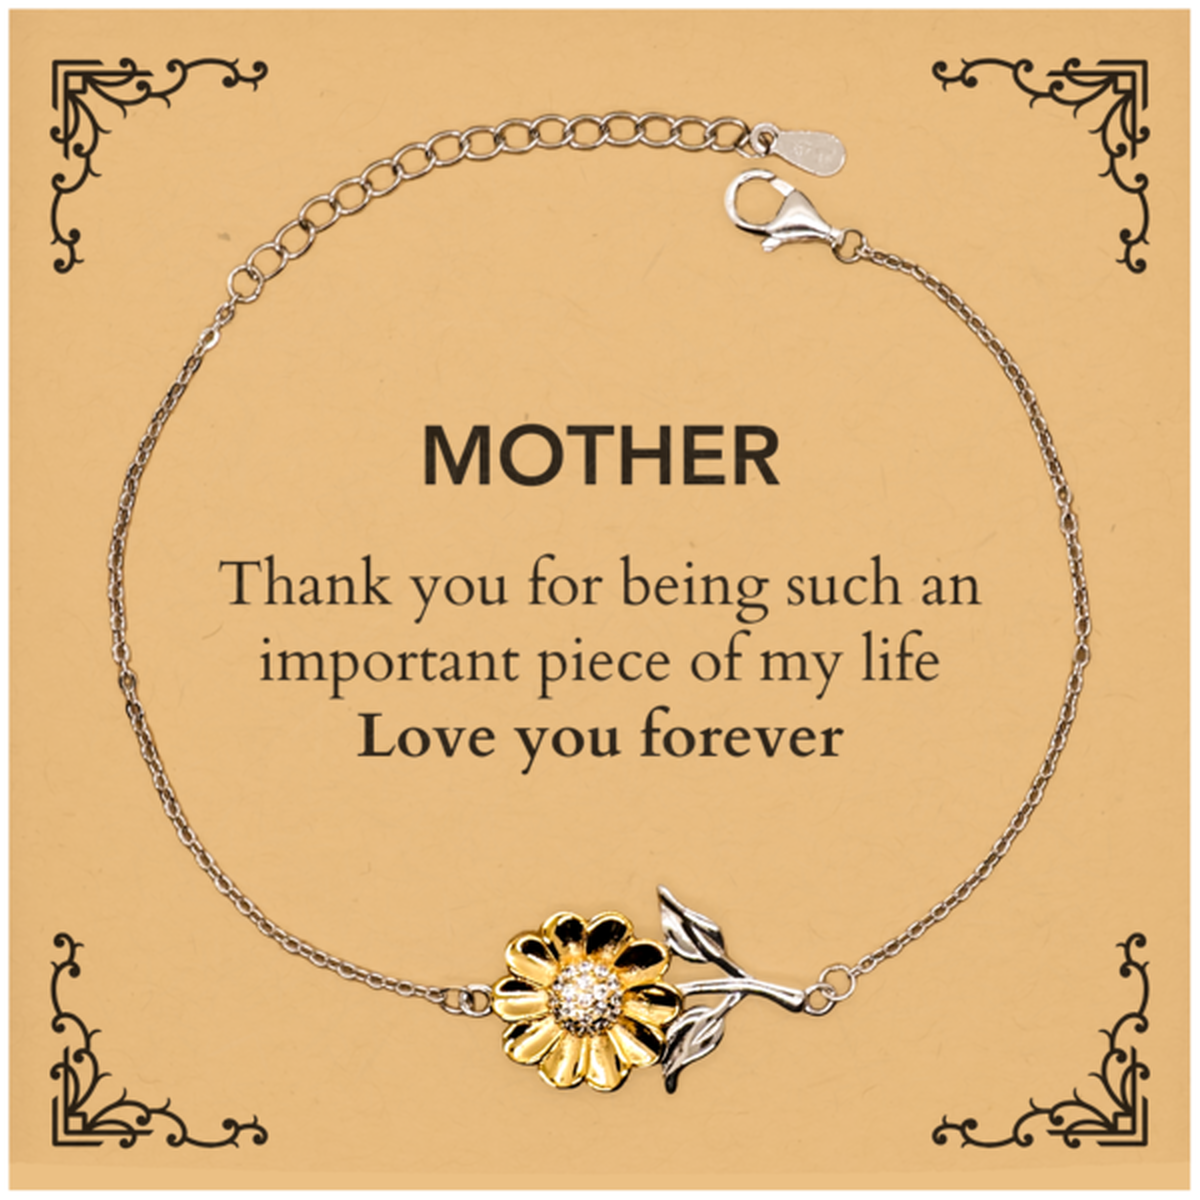 Appropriate Mother Sunflower Bracelet Epic Birthday Gifts for Mother Thank you for being such an important piece of my life Mother Christmas Mothers Fathers Day